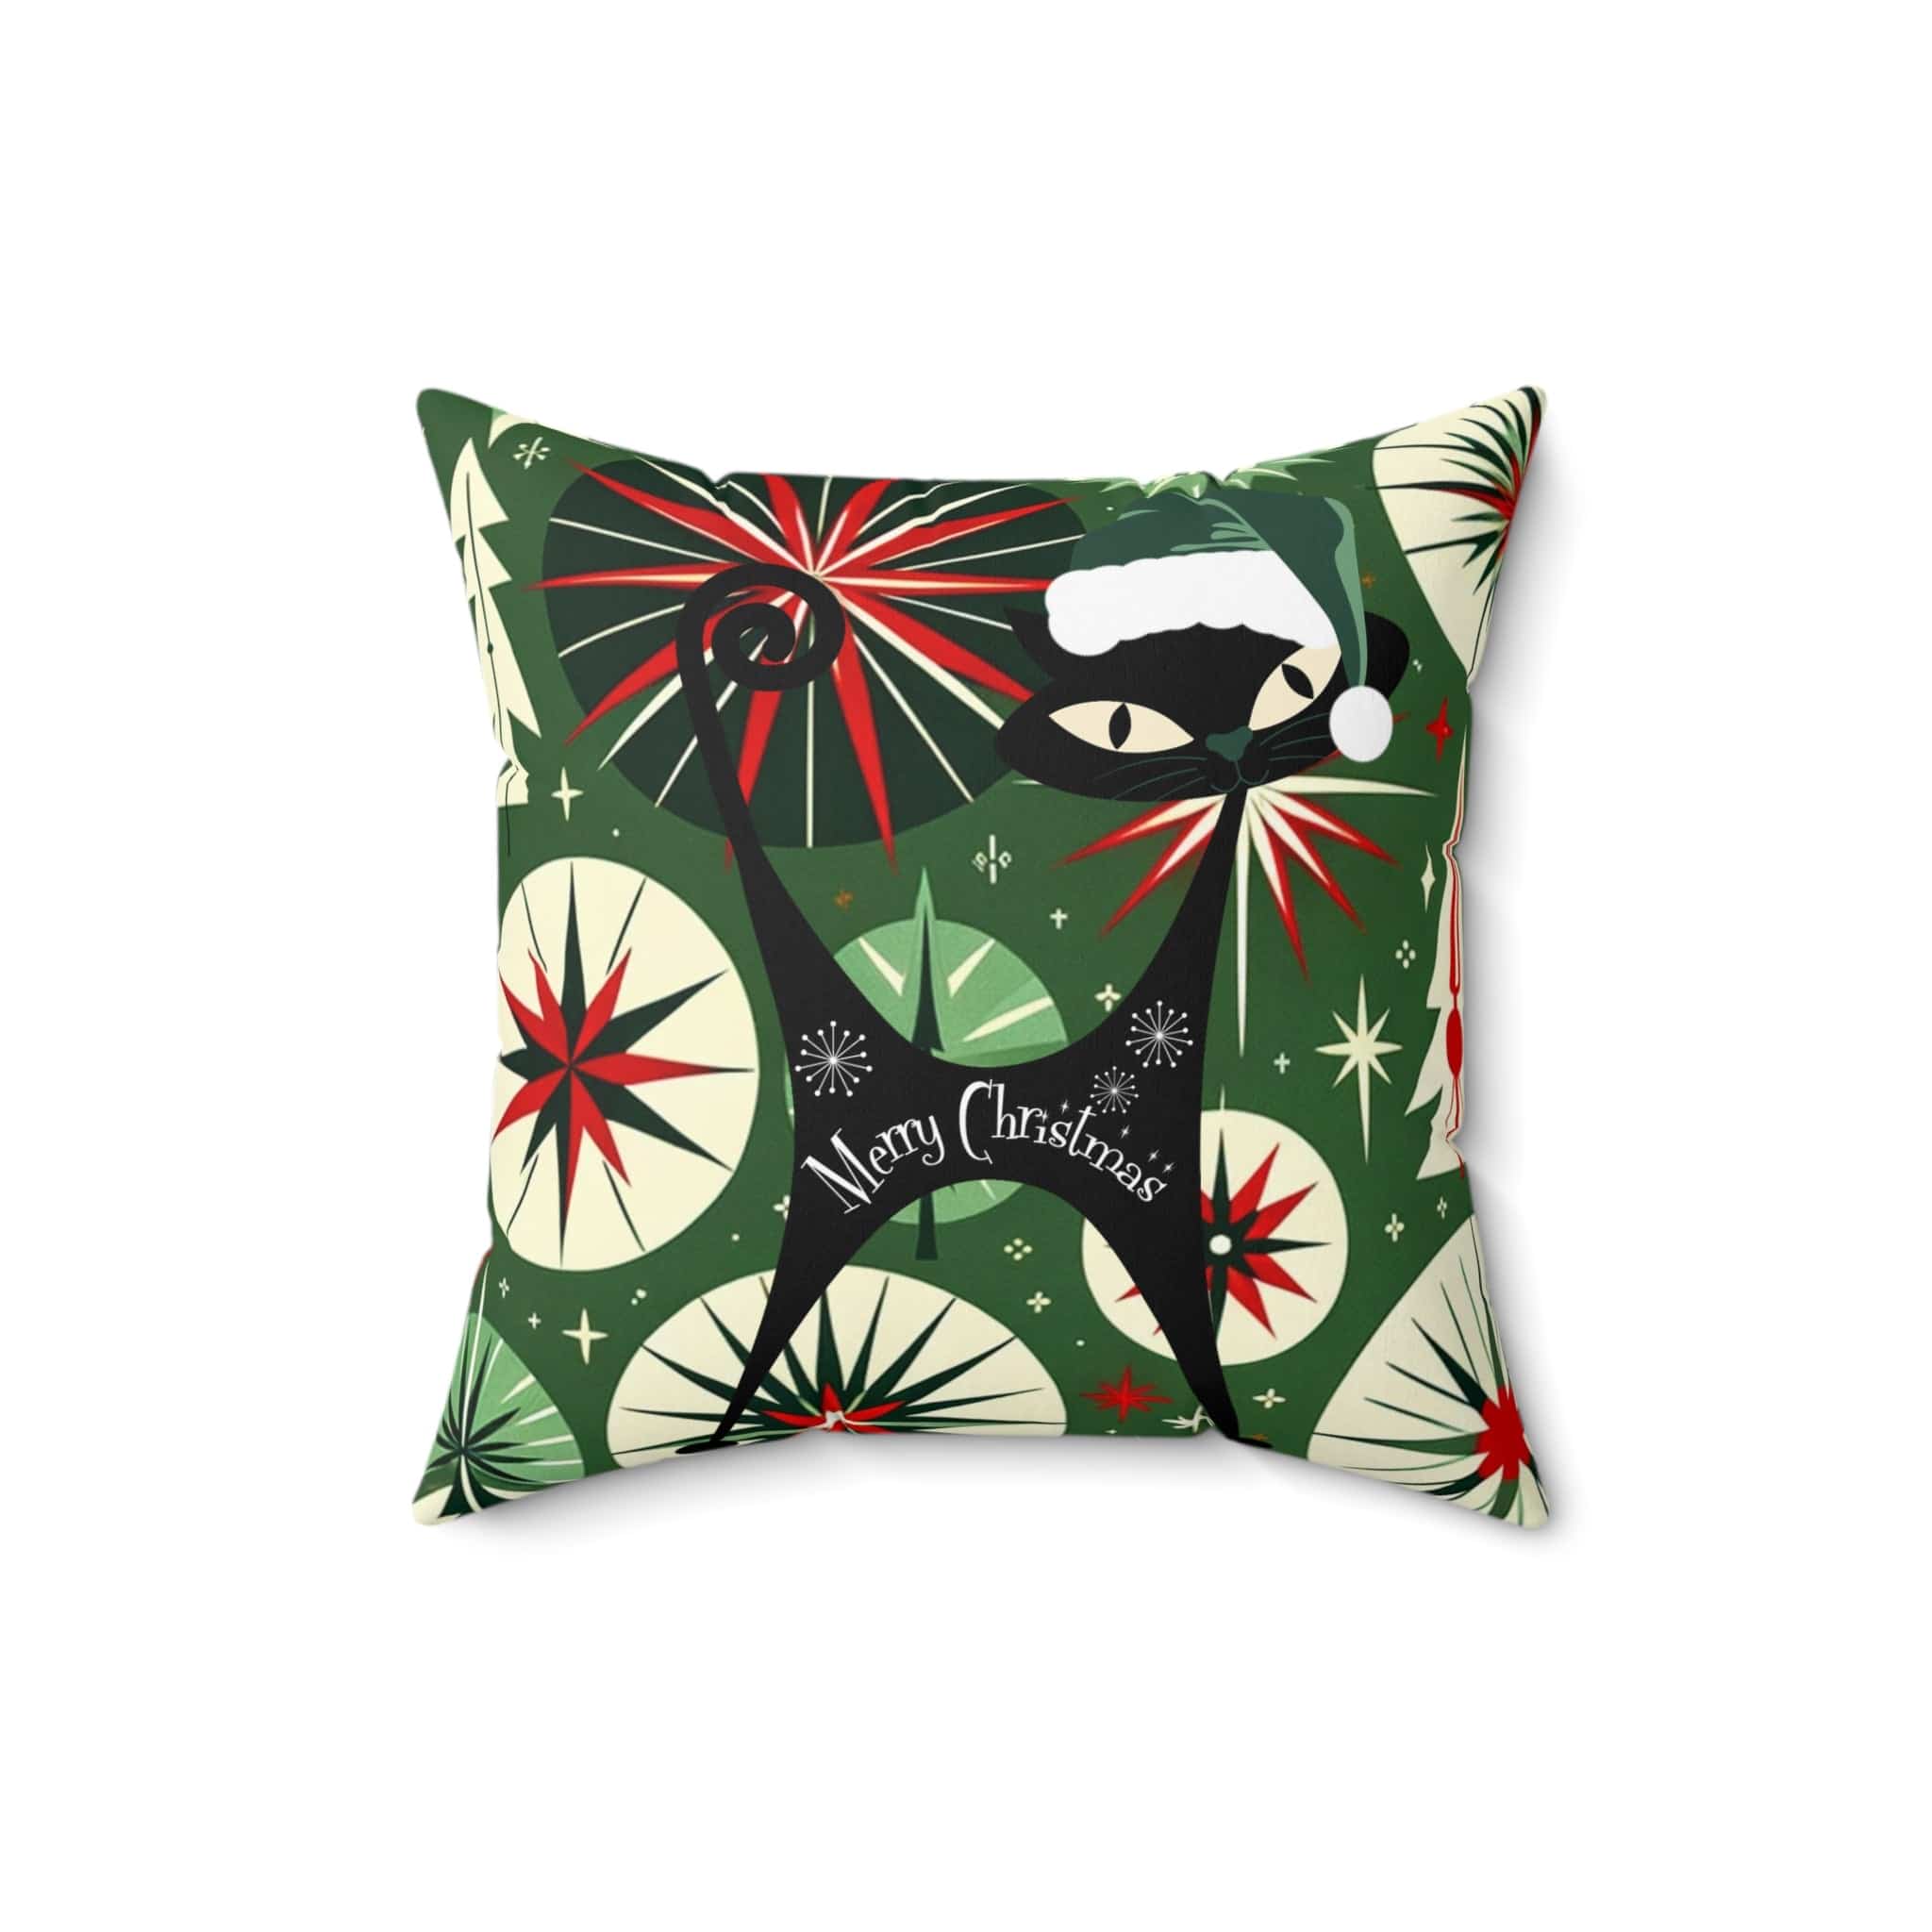 Mid Century Modern Christmas Pillow, Atomic Cat, Starbursts, Sputnik Designs, Green, Red Pillow And Insert Home Decor 16&quot; × 16&quot;